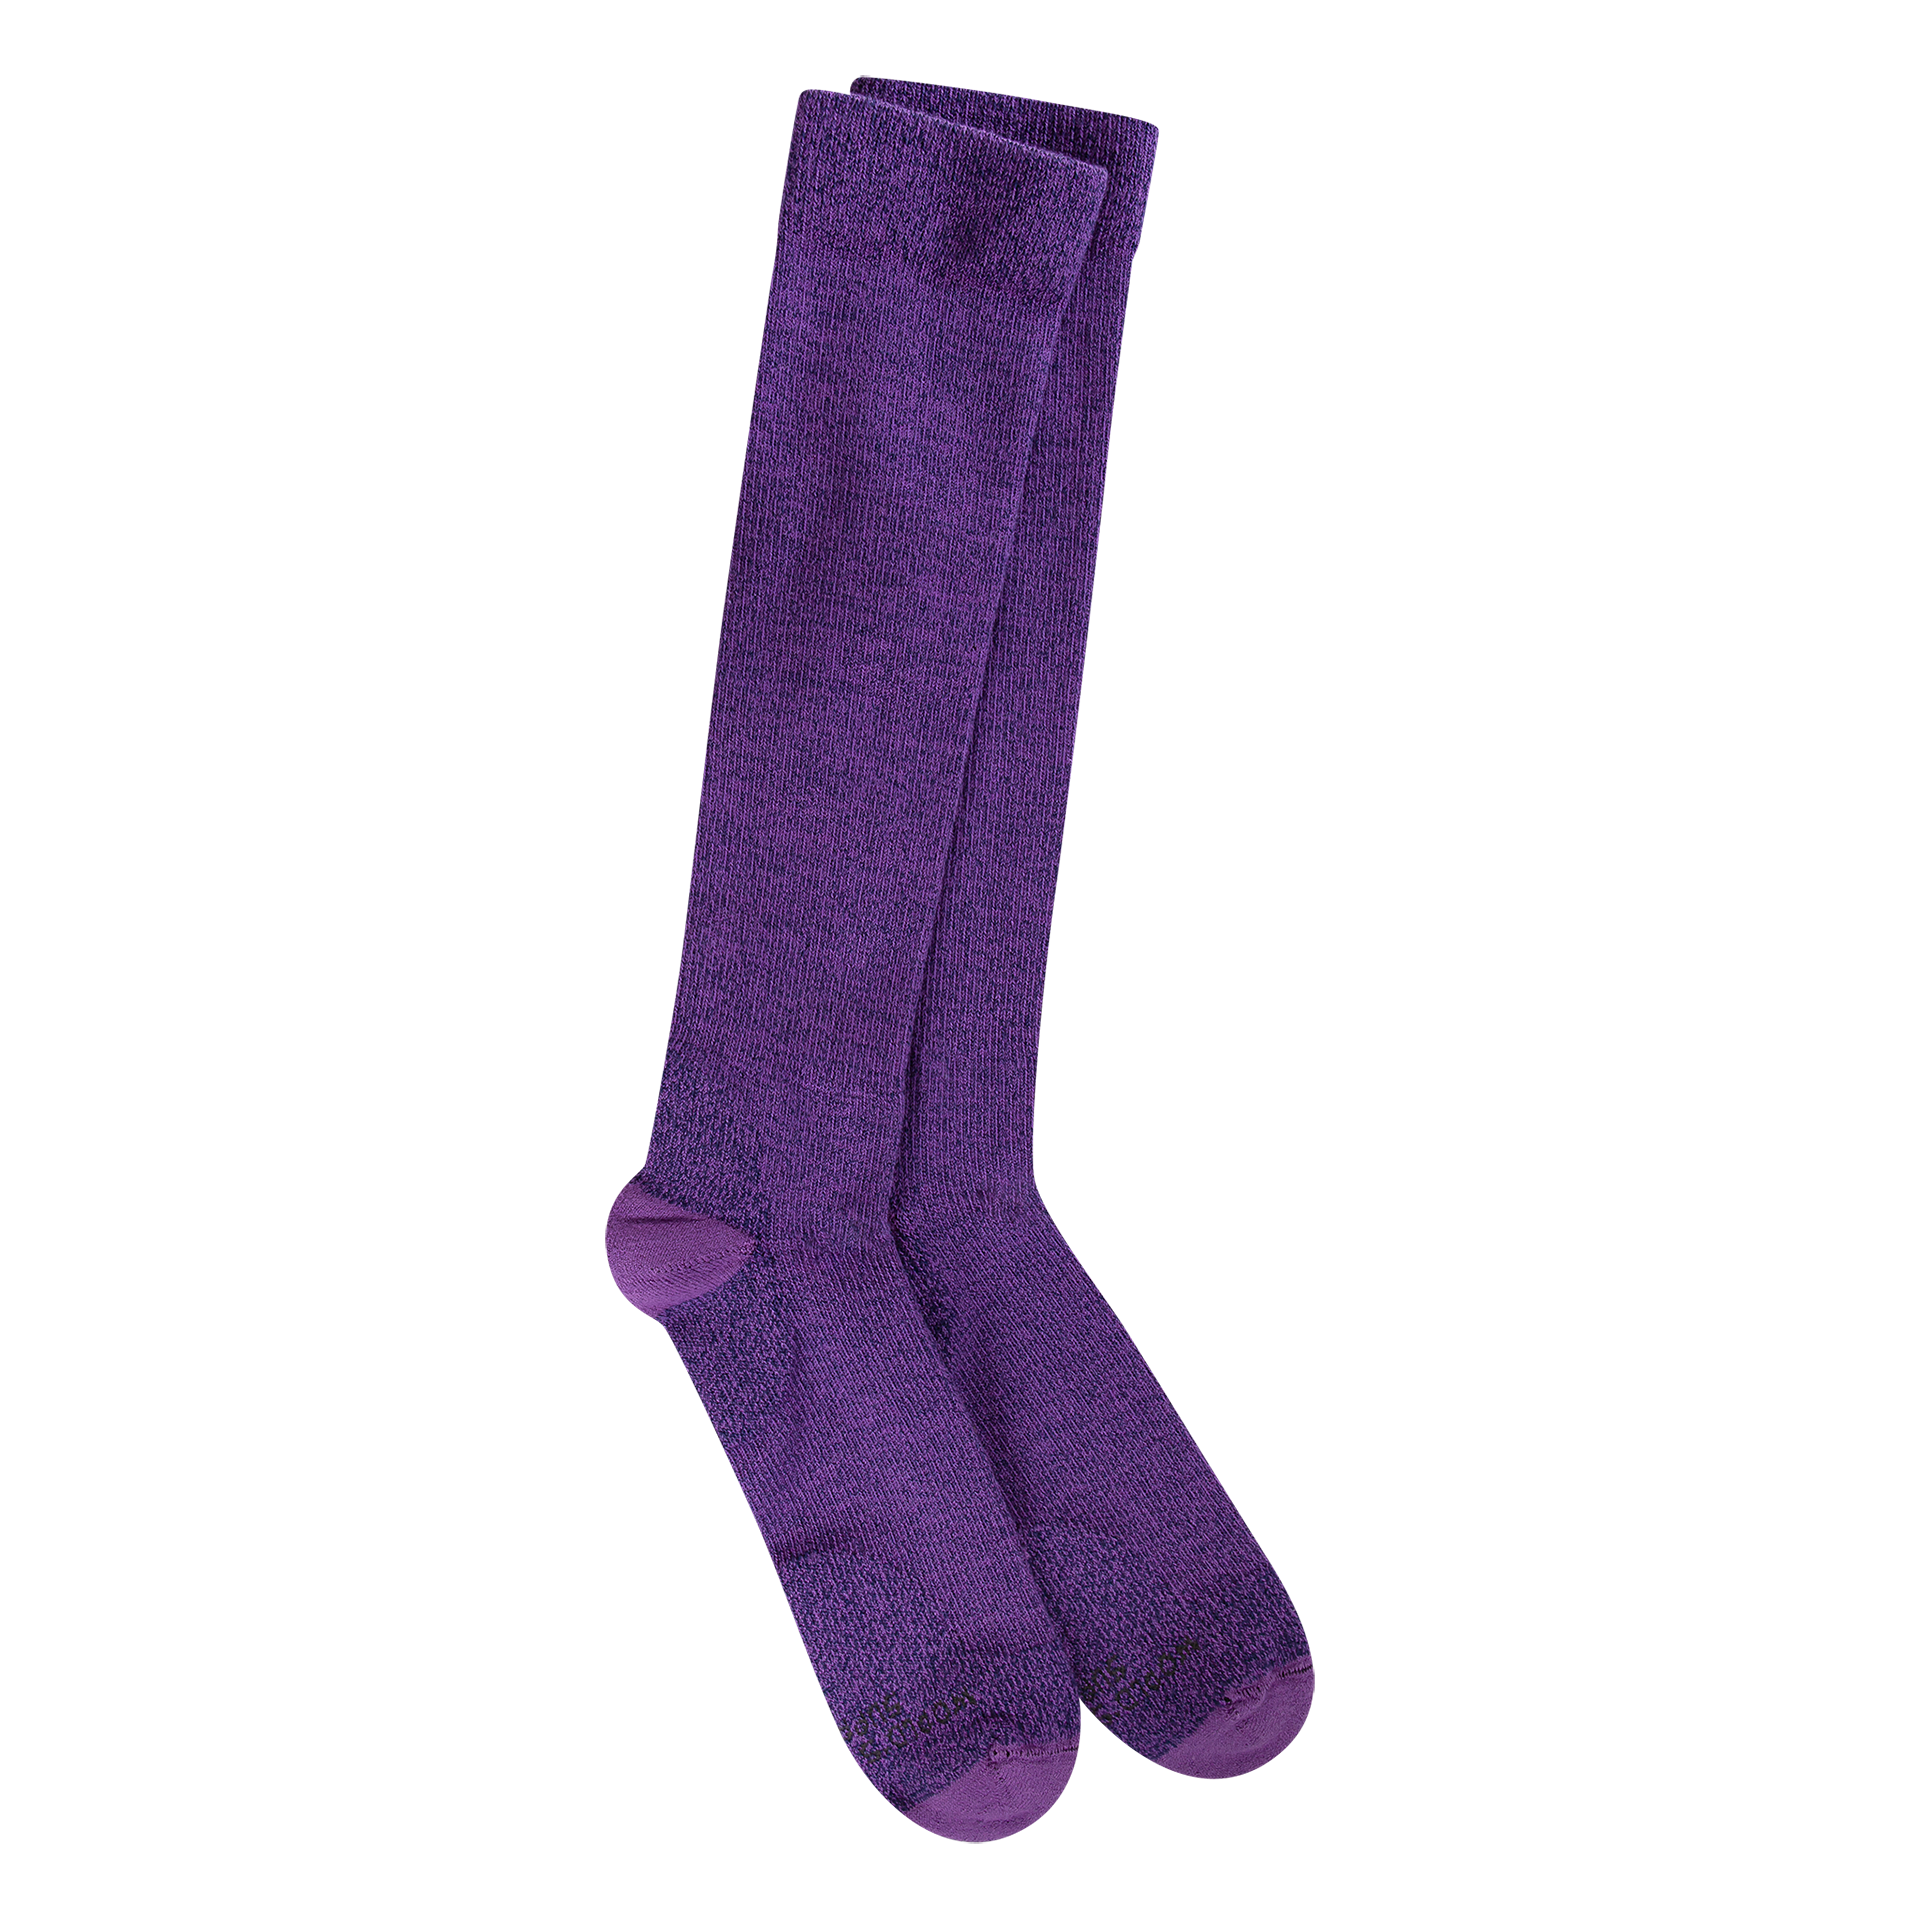 Support Fit Fashion Over-the-calf Purple Marled